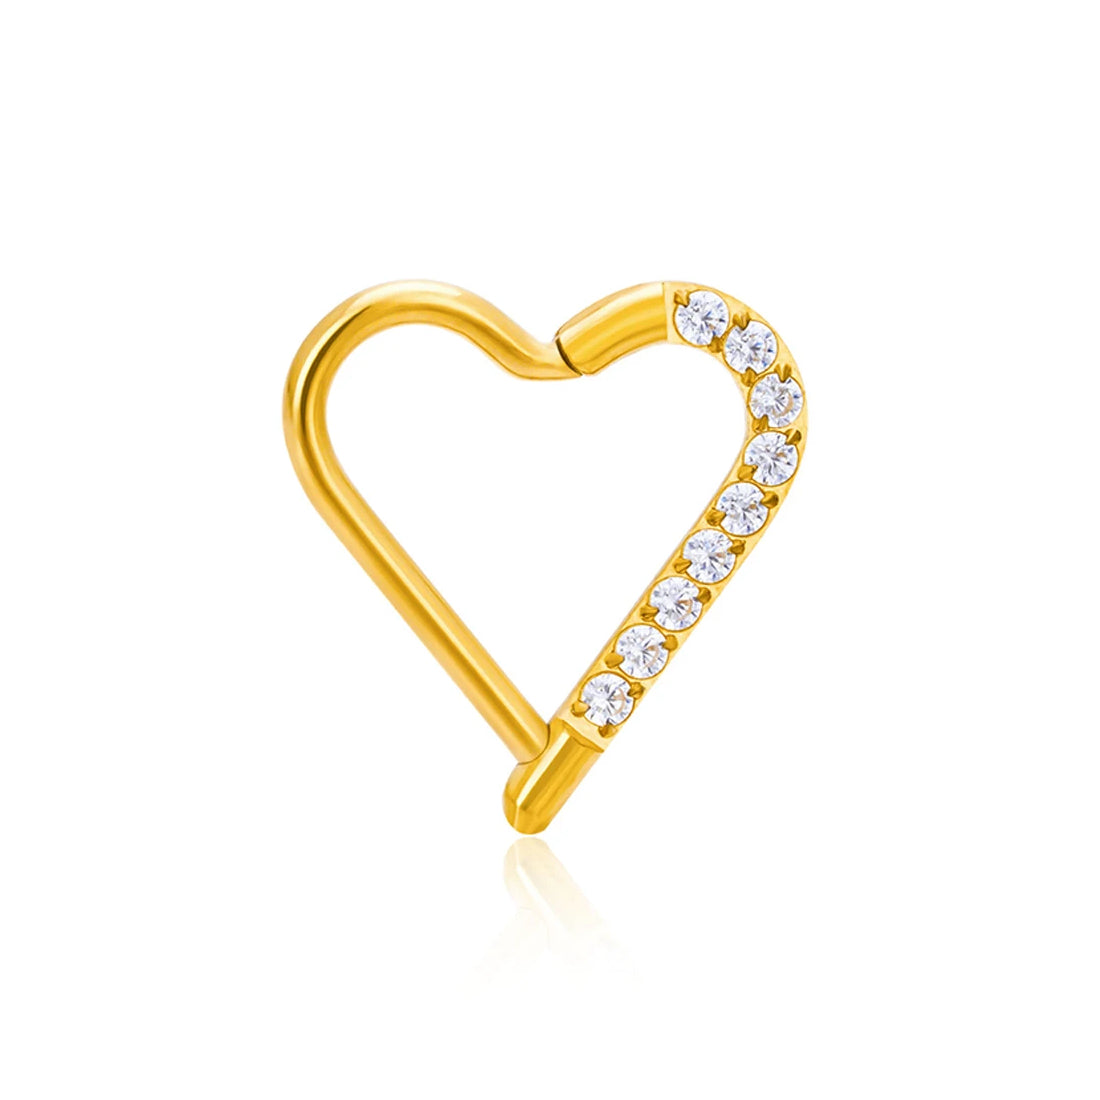 Daith heart piercing gold and silver daith ring titanium 16G with CZ stones hinged segment clicker Ashley Piercing Jewelry